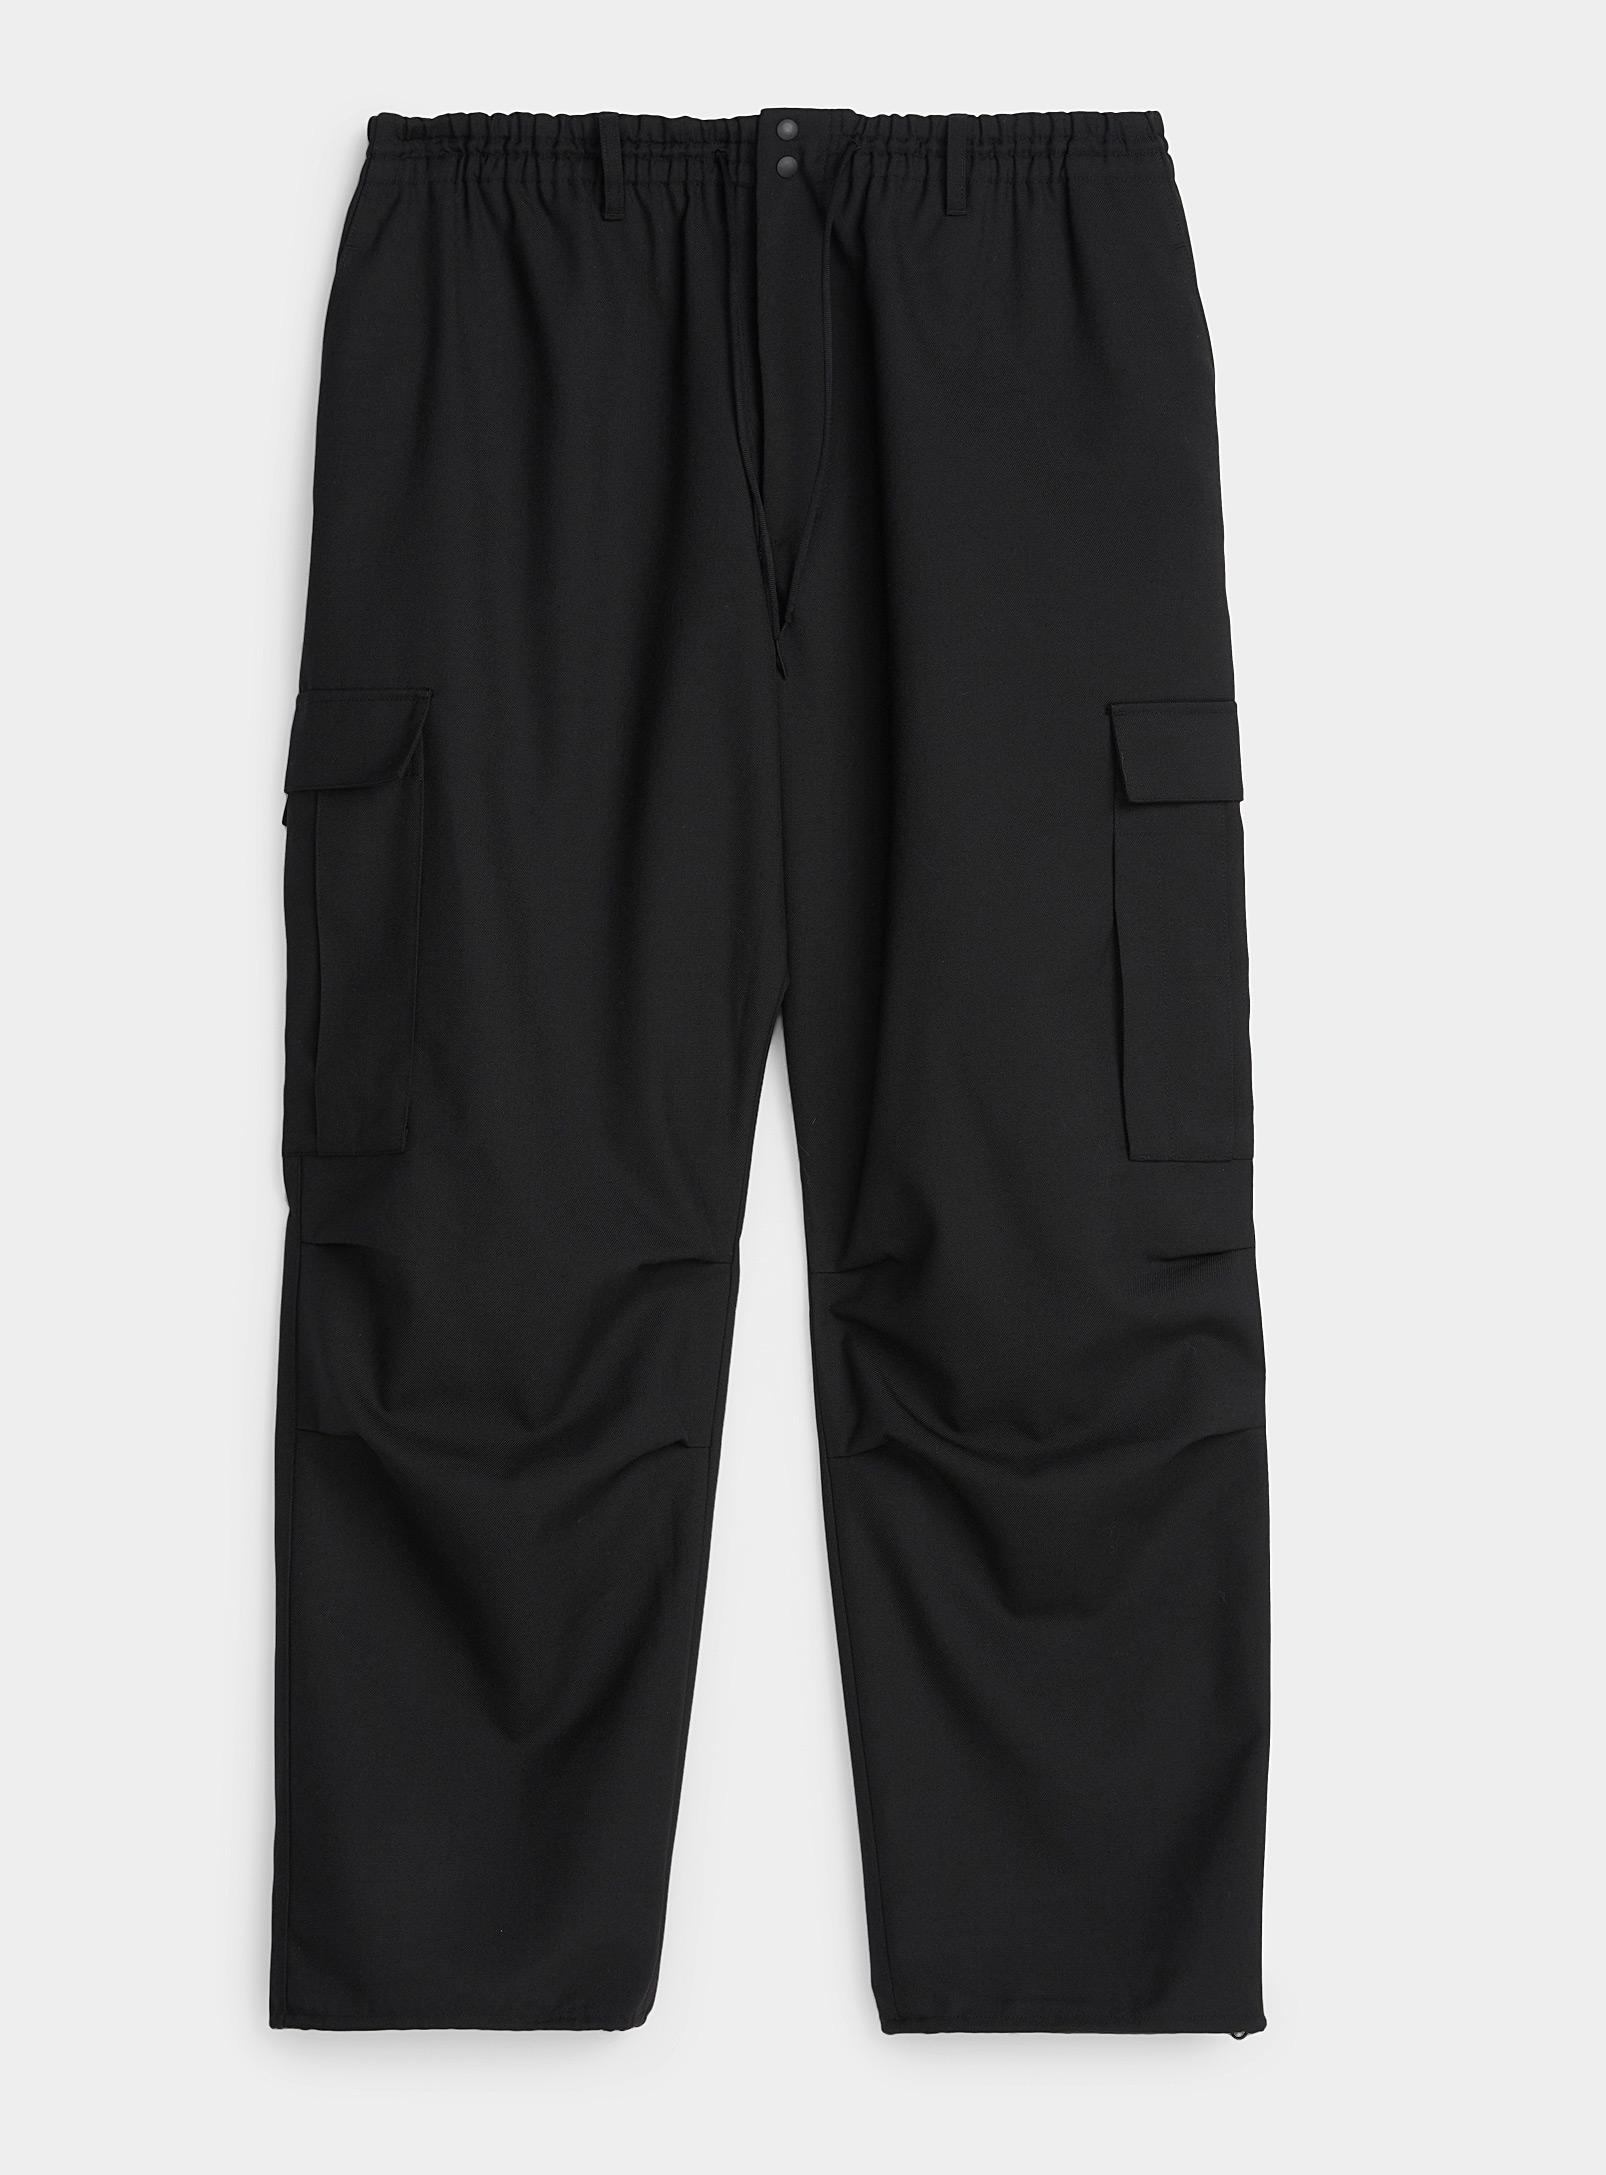 Y-3 Synthetic Elastic Waist Twill Cargo Pant (men, Black, Large) for ...